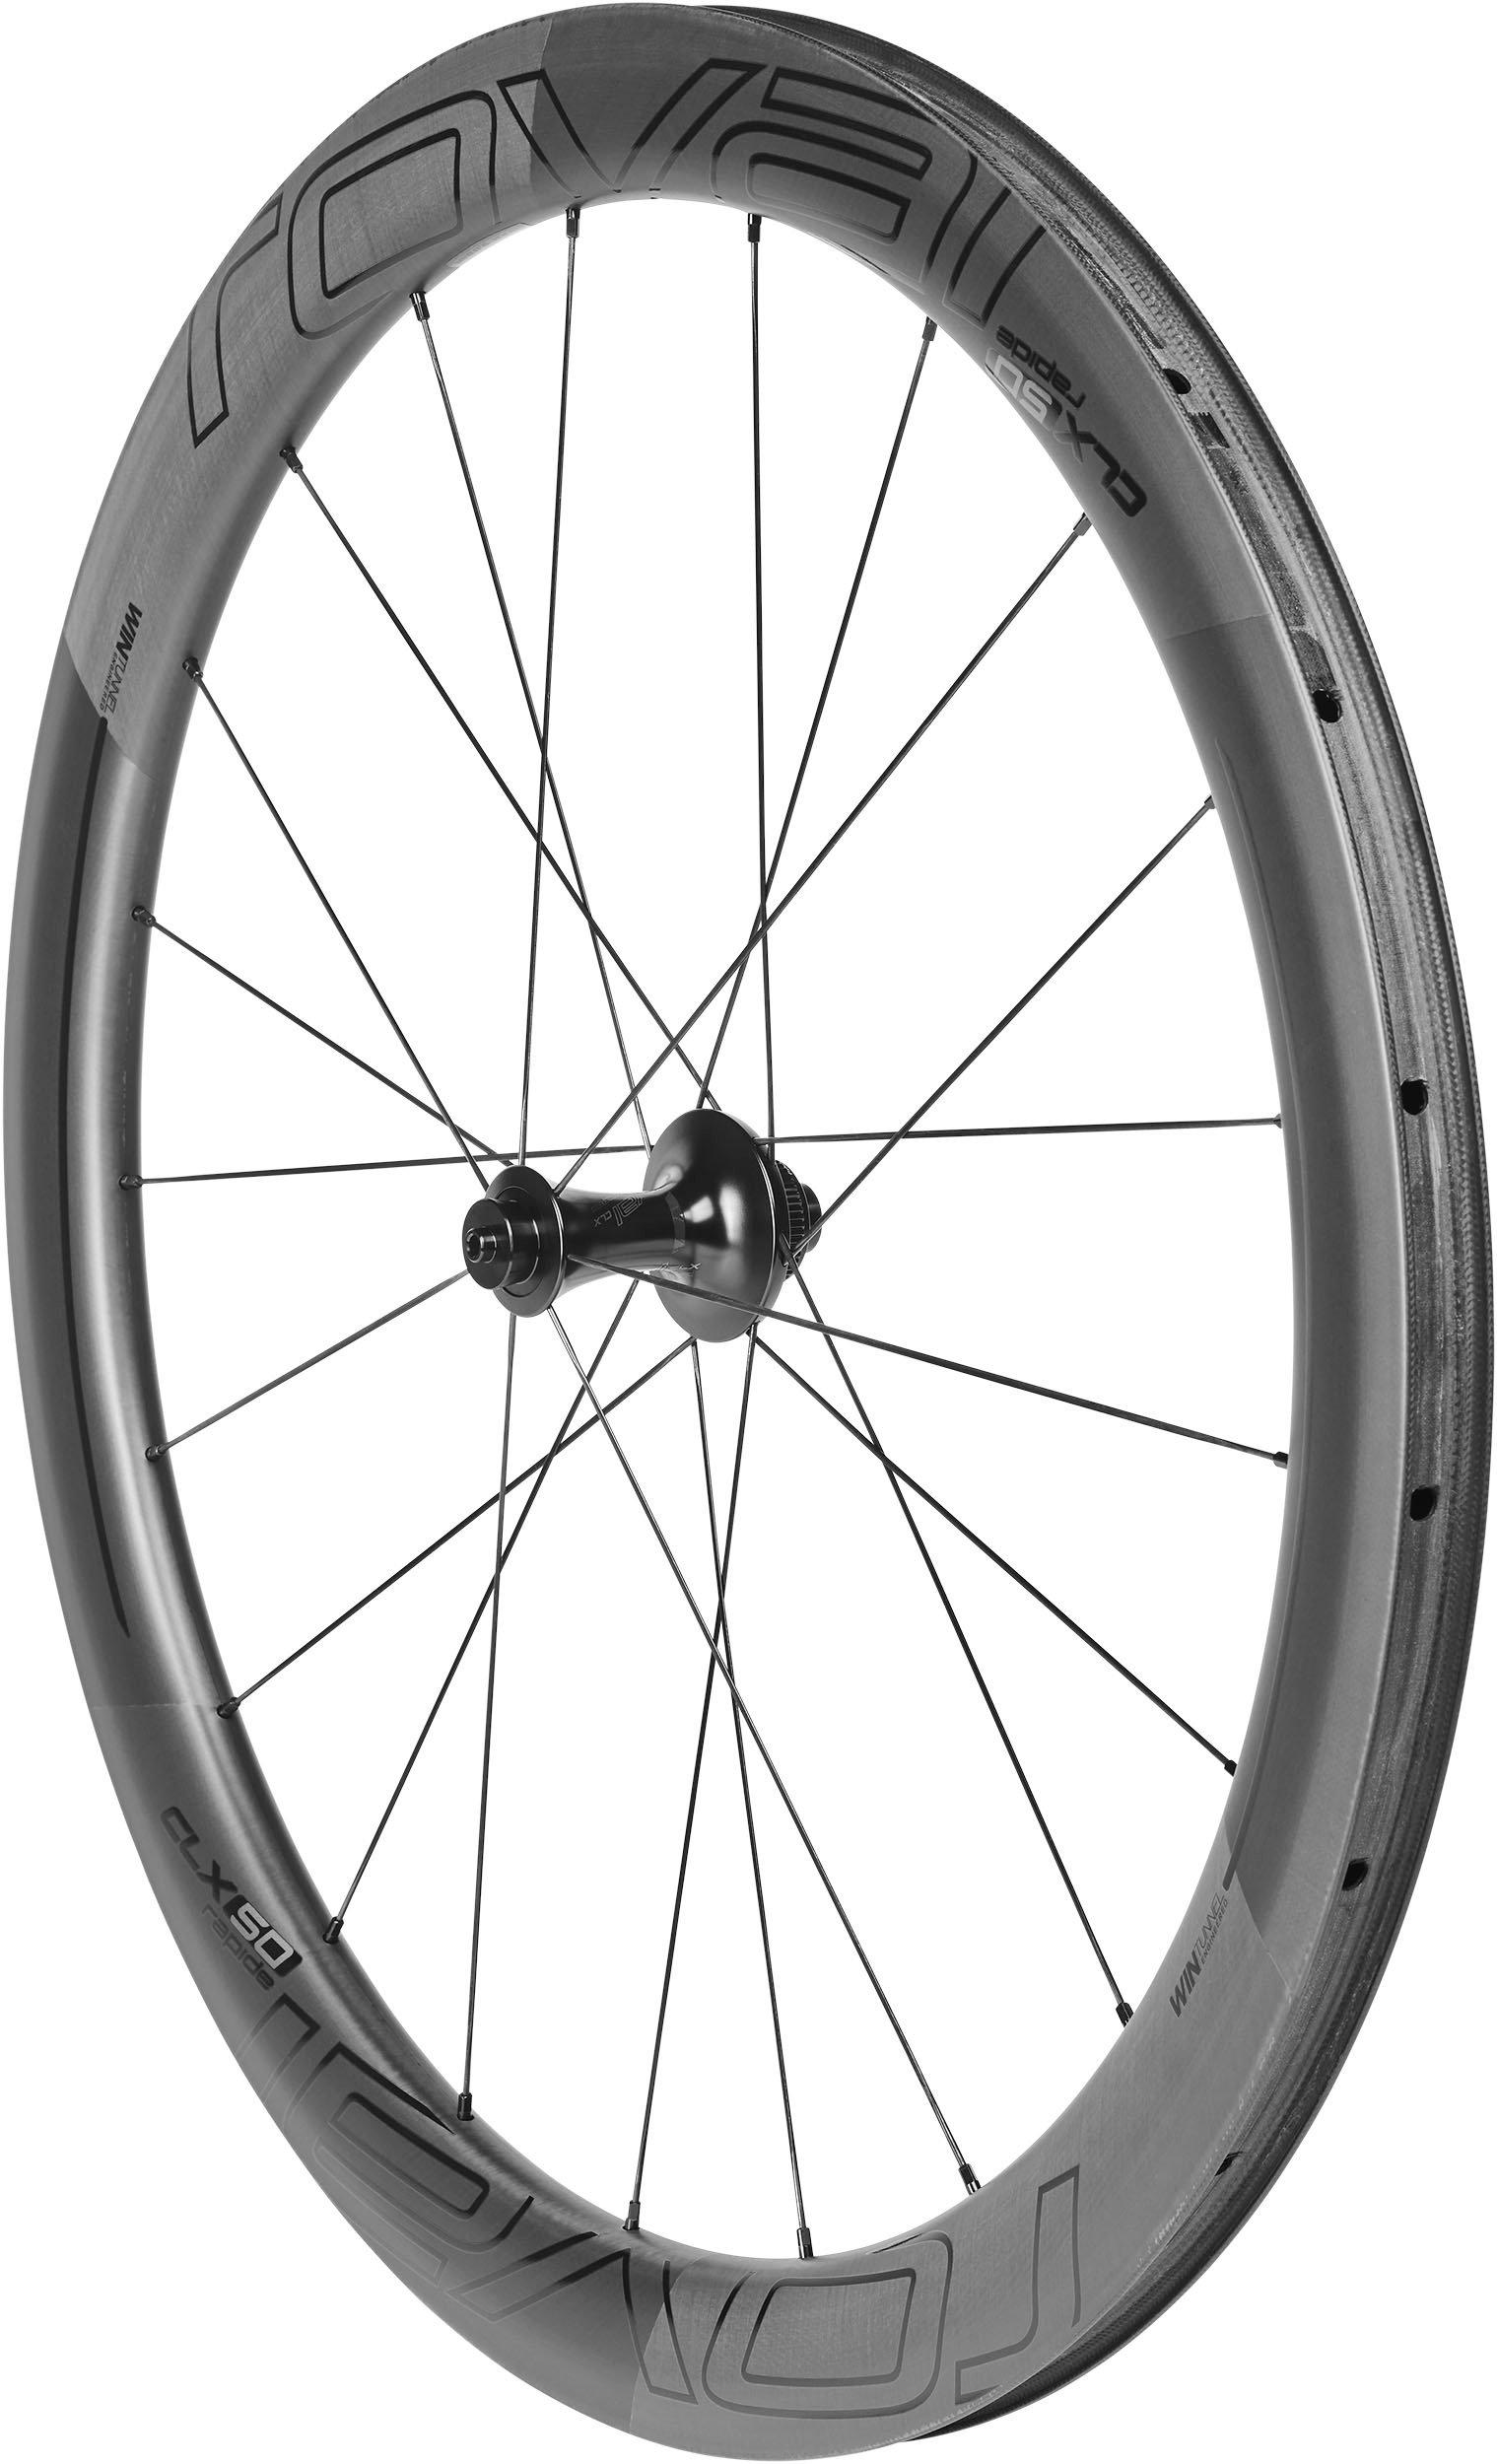 Roval CLX 50 Disc – Front